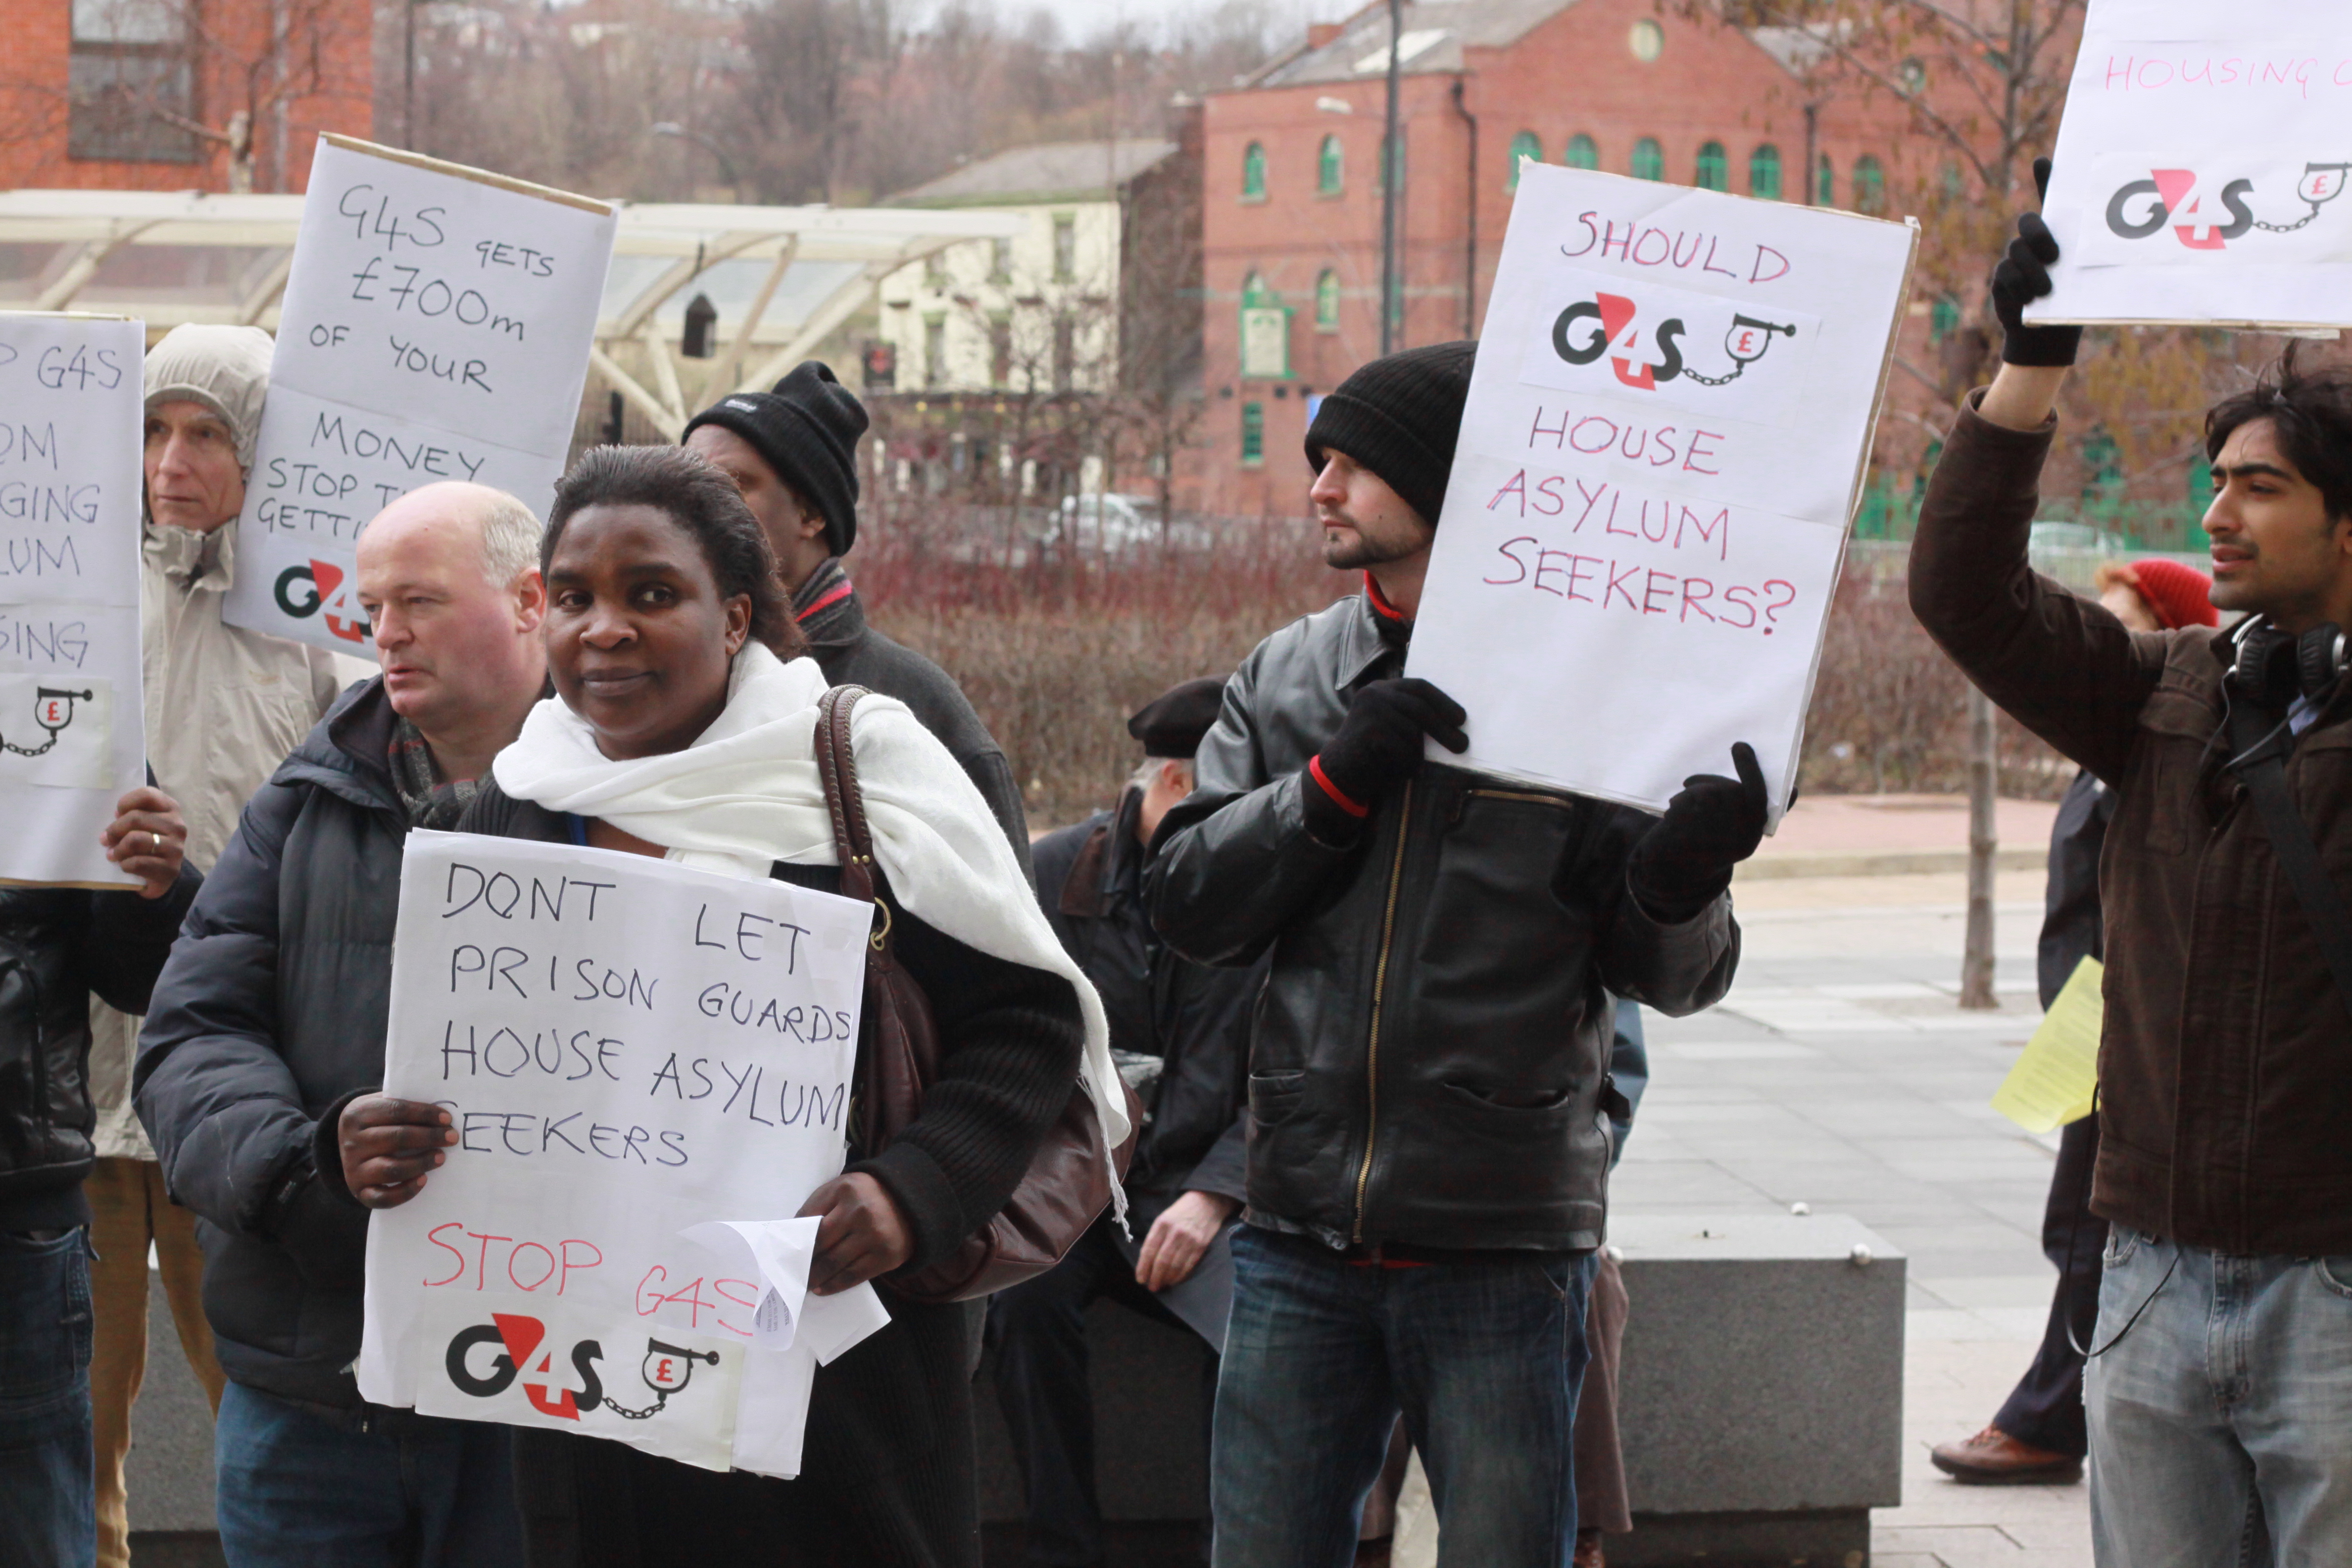 “G4S tenants will be dancing in the streets”